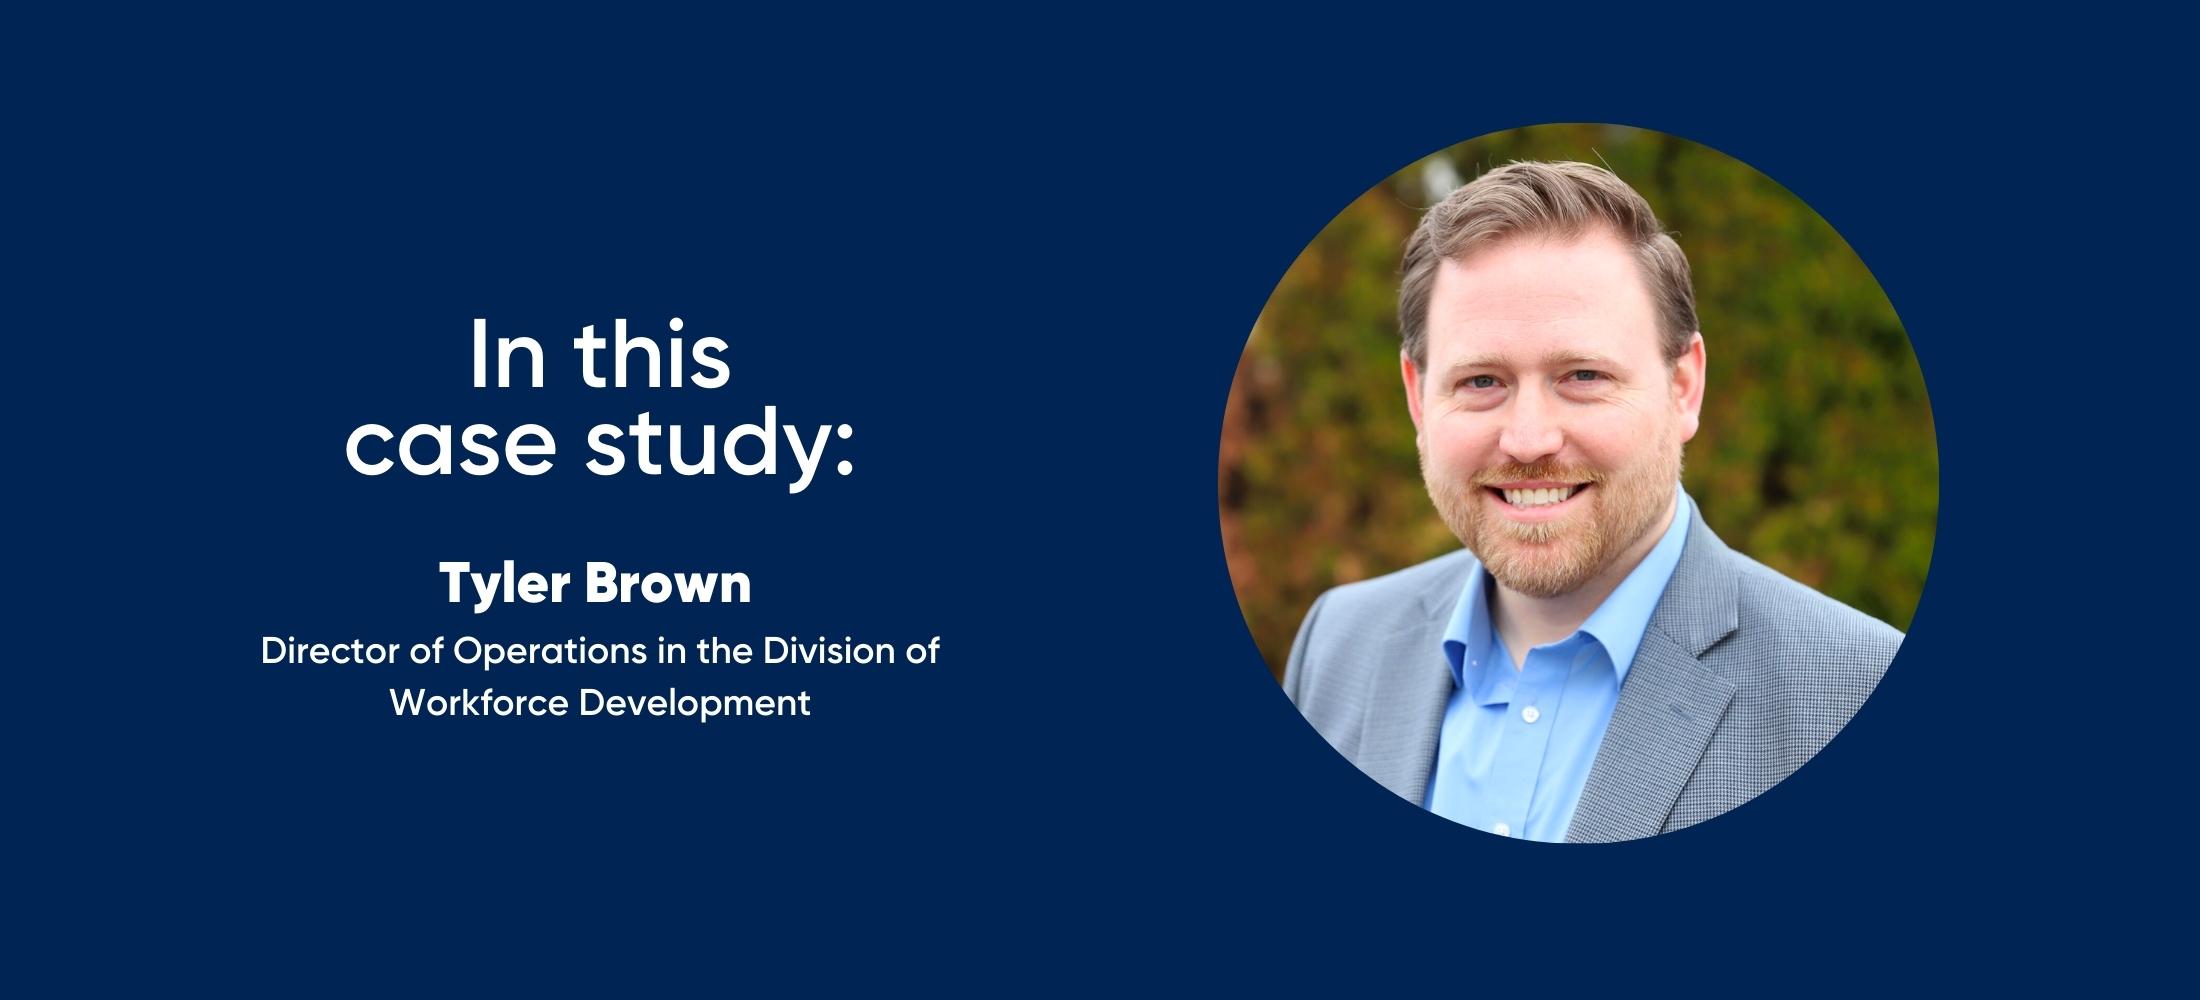 in this case study: Tyler Brown - Director of Operations in the Division of Workforce Development